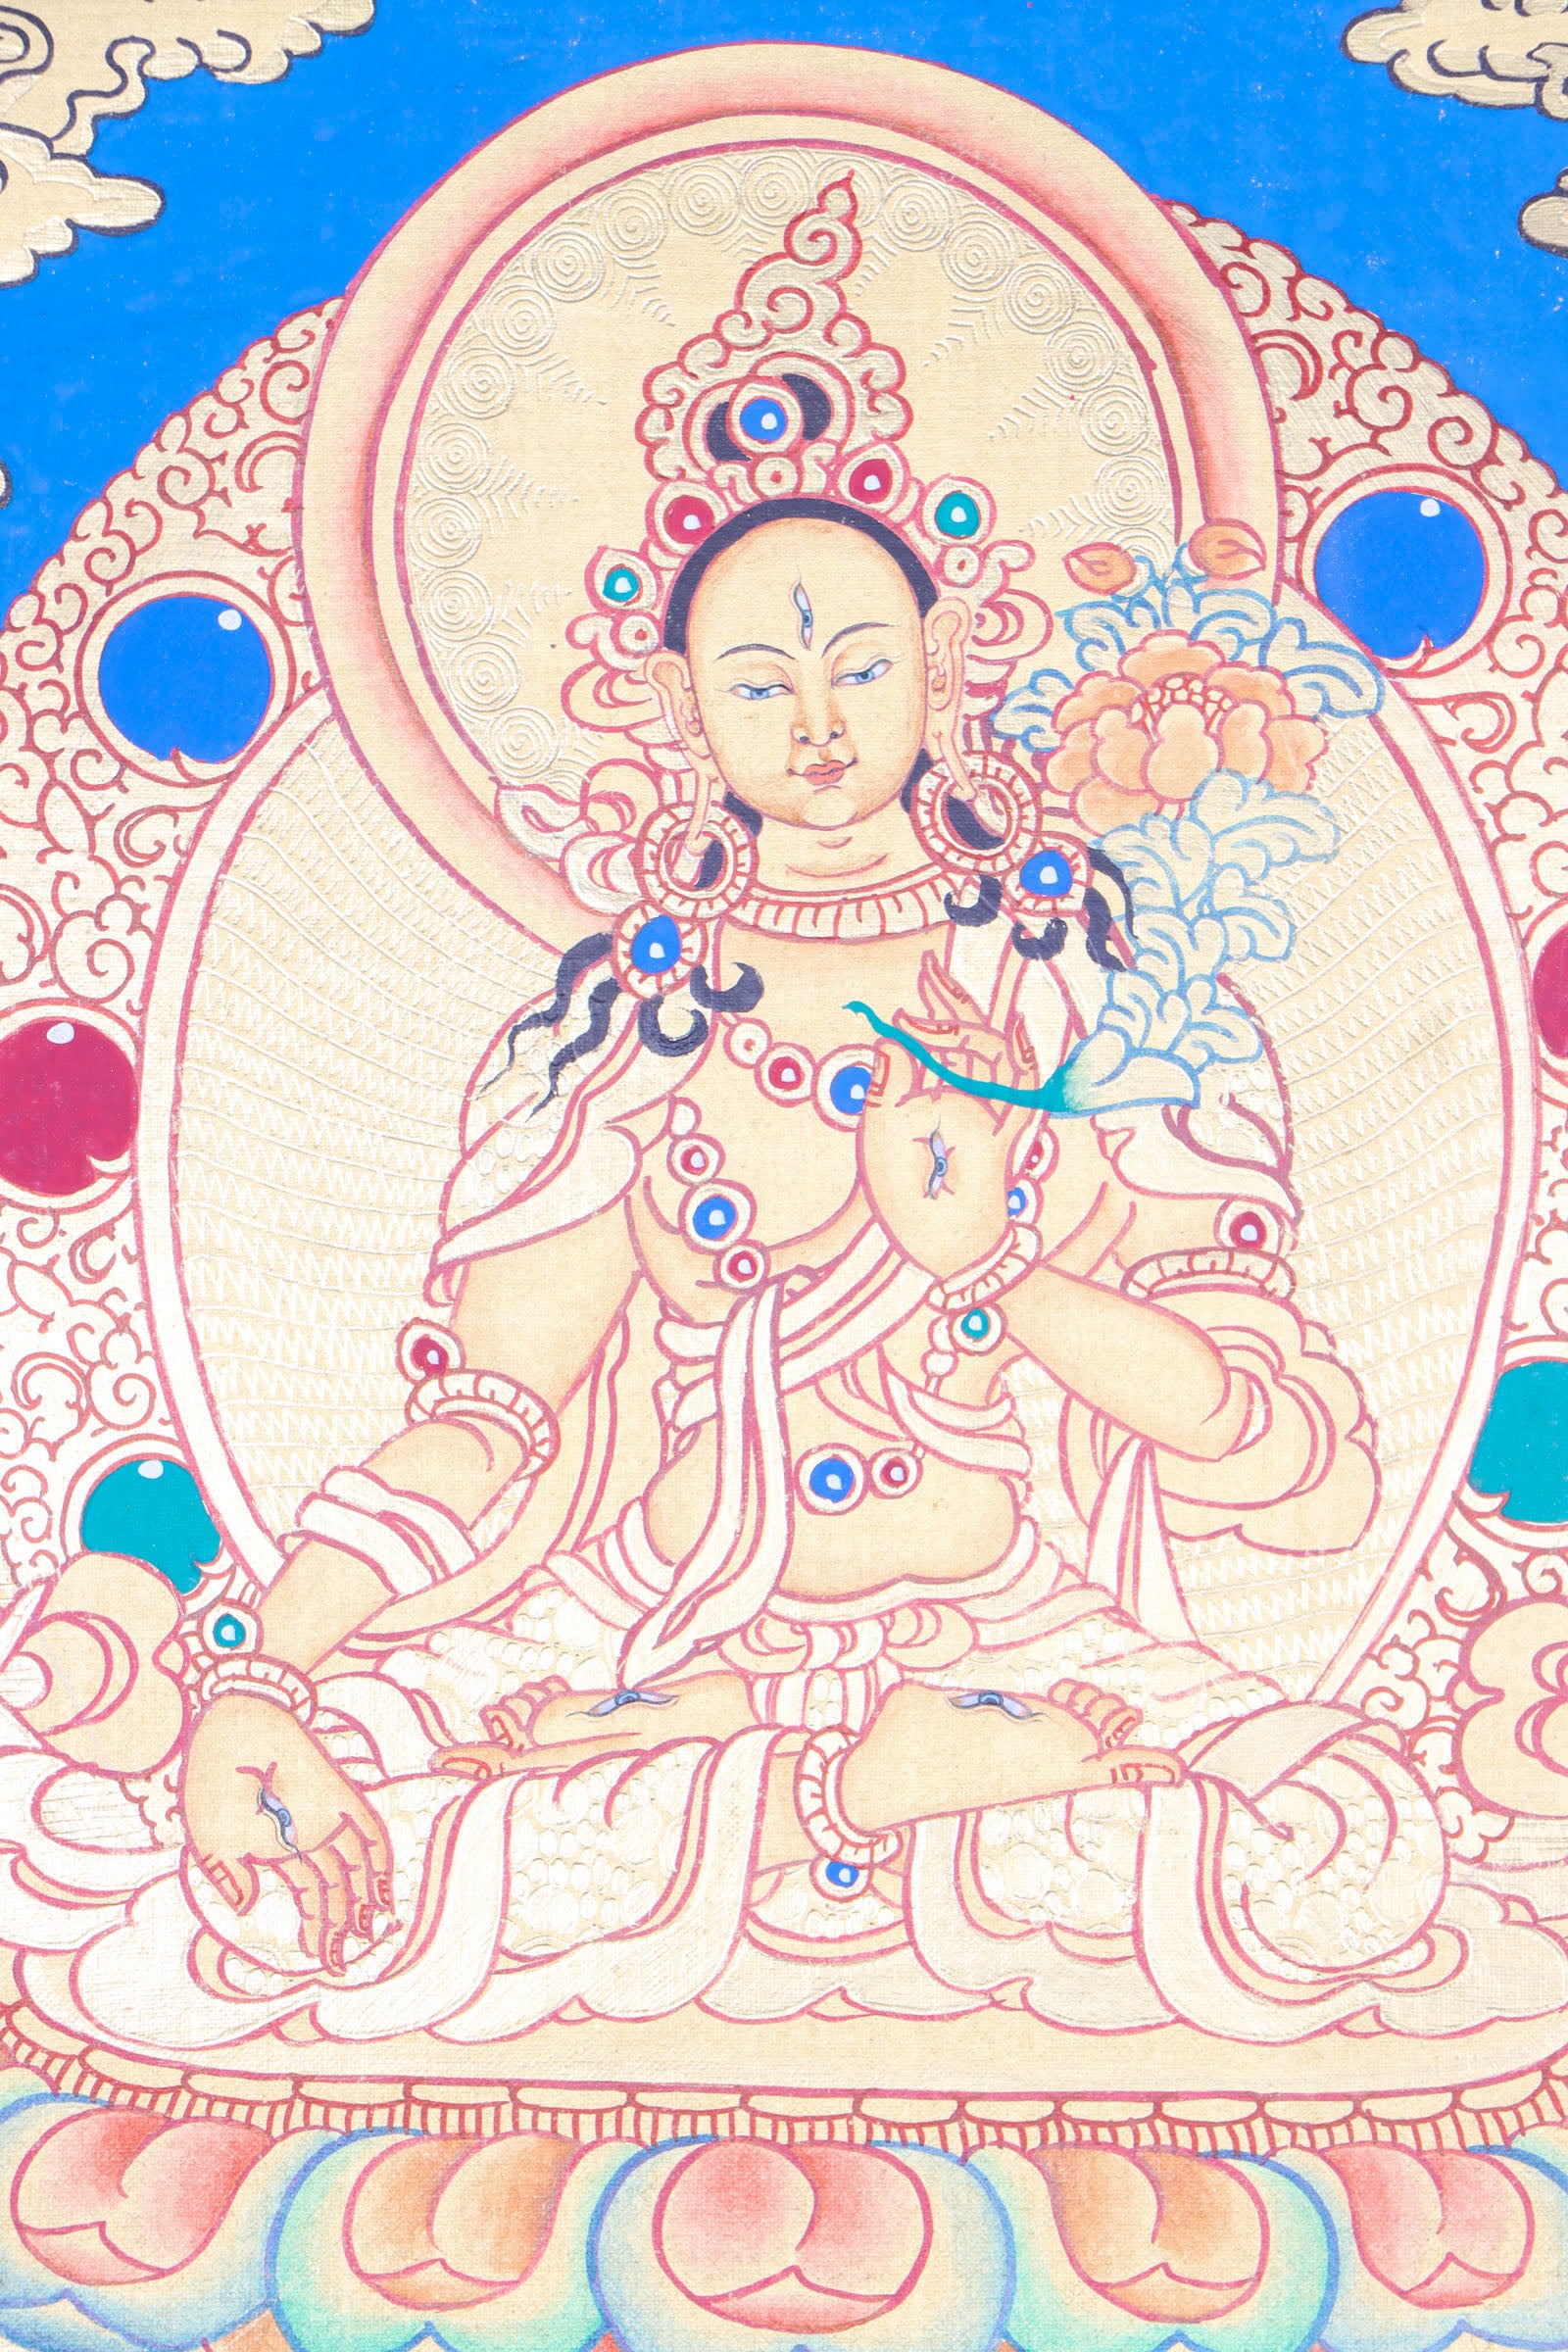  White Tara Thangka Painting is an ideal tool for meditative reflection.